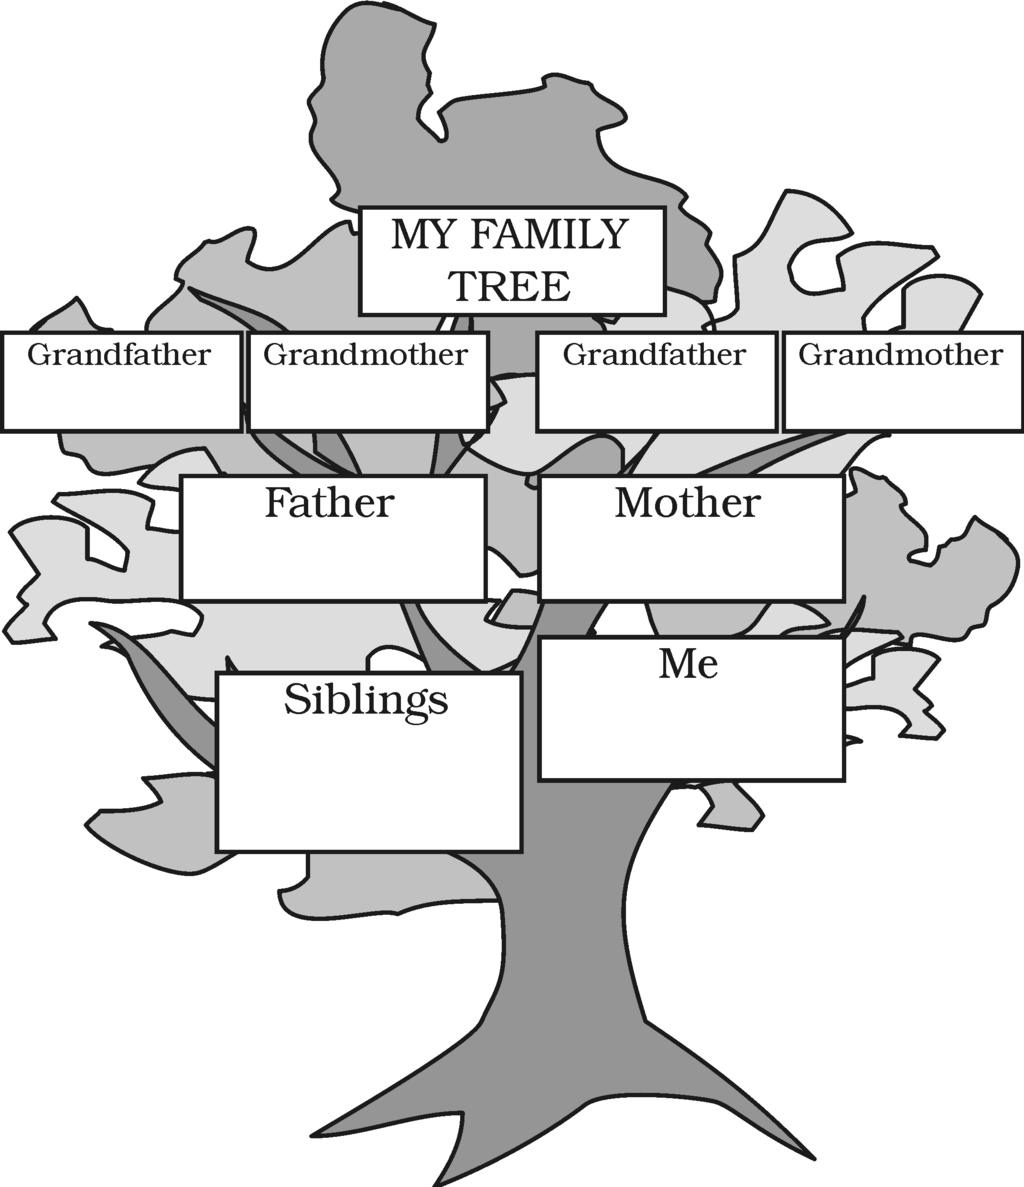 Lesson 34 - MY FAMILY TREE 52 Classroom Book: Doctrine and